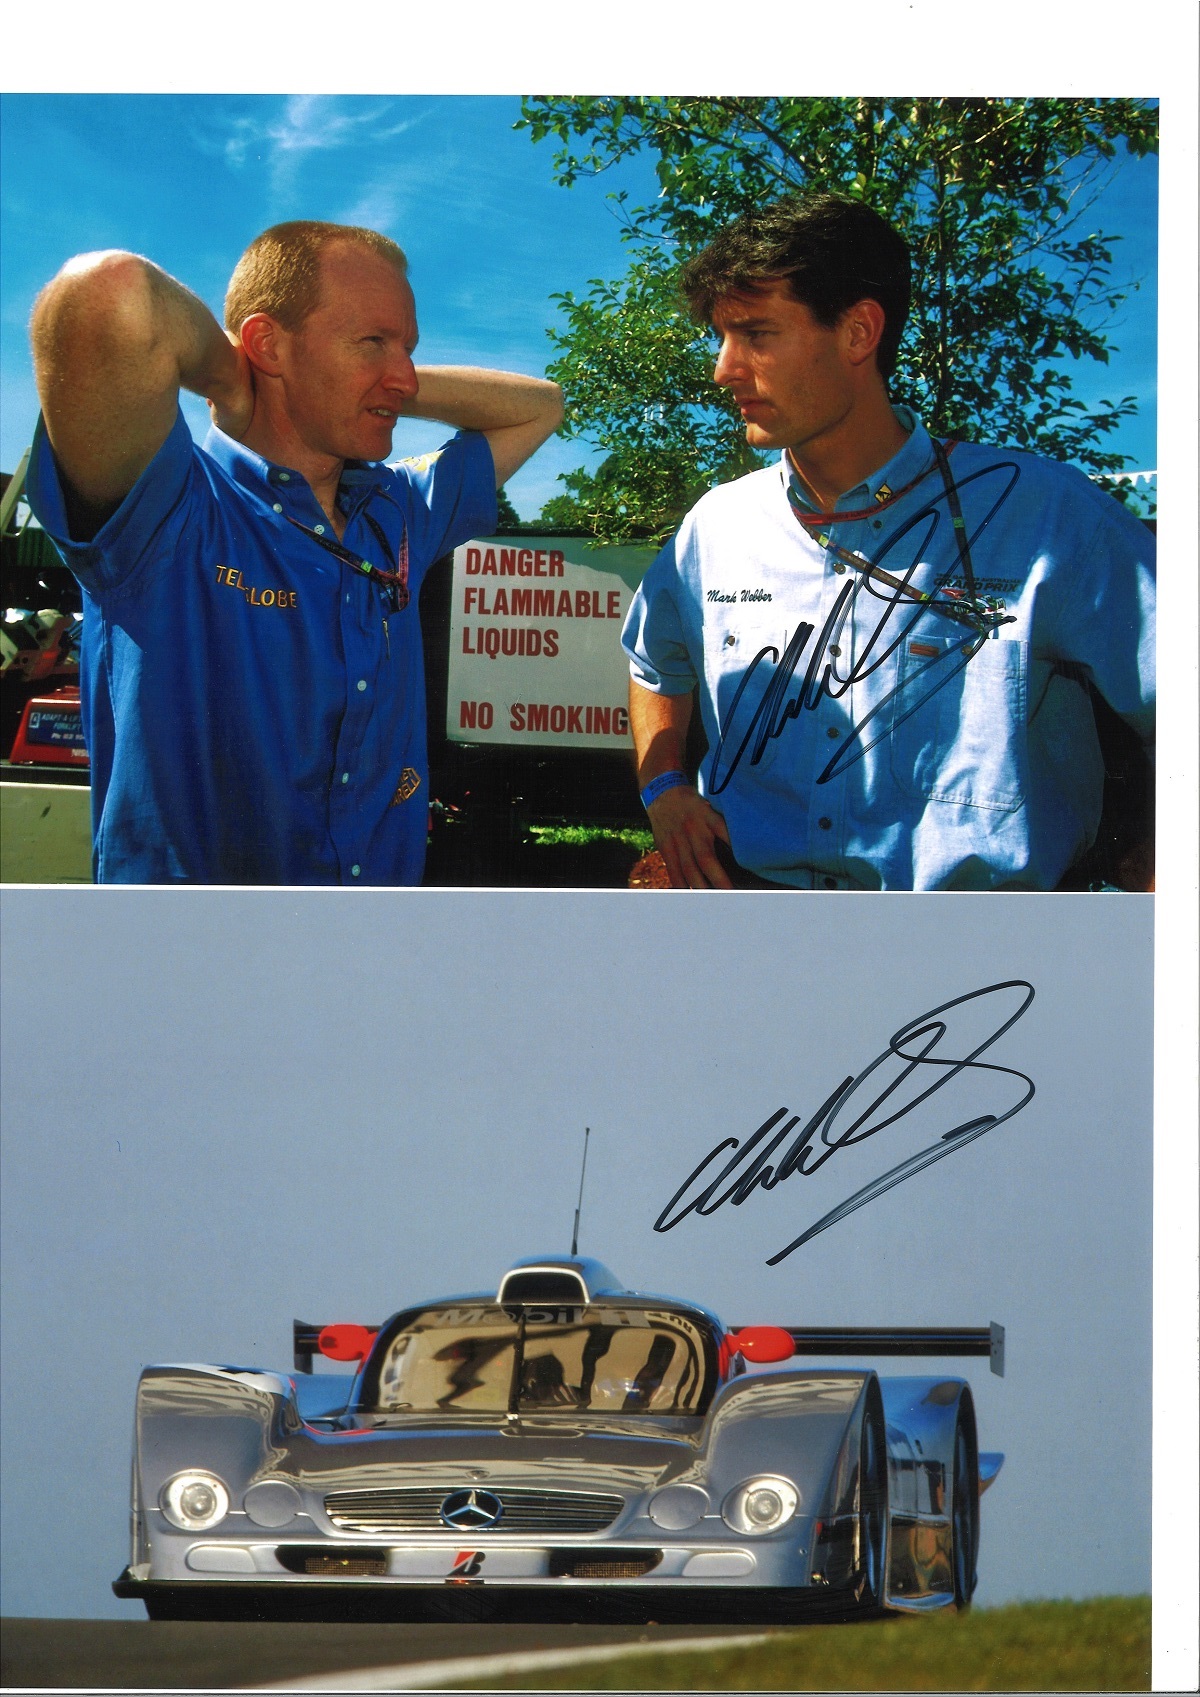 Motor Racing Mark Webber collection 23 superb, signed colour photos from Australian career in - Image 2 of 2